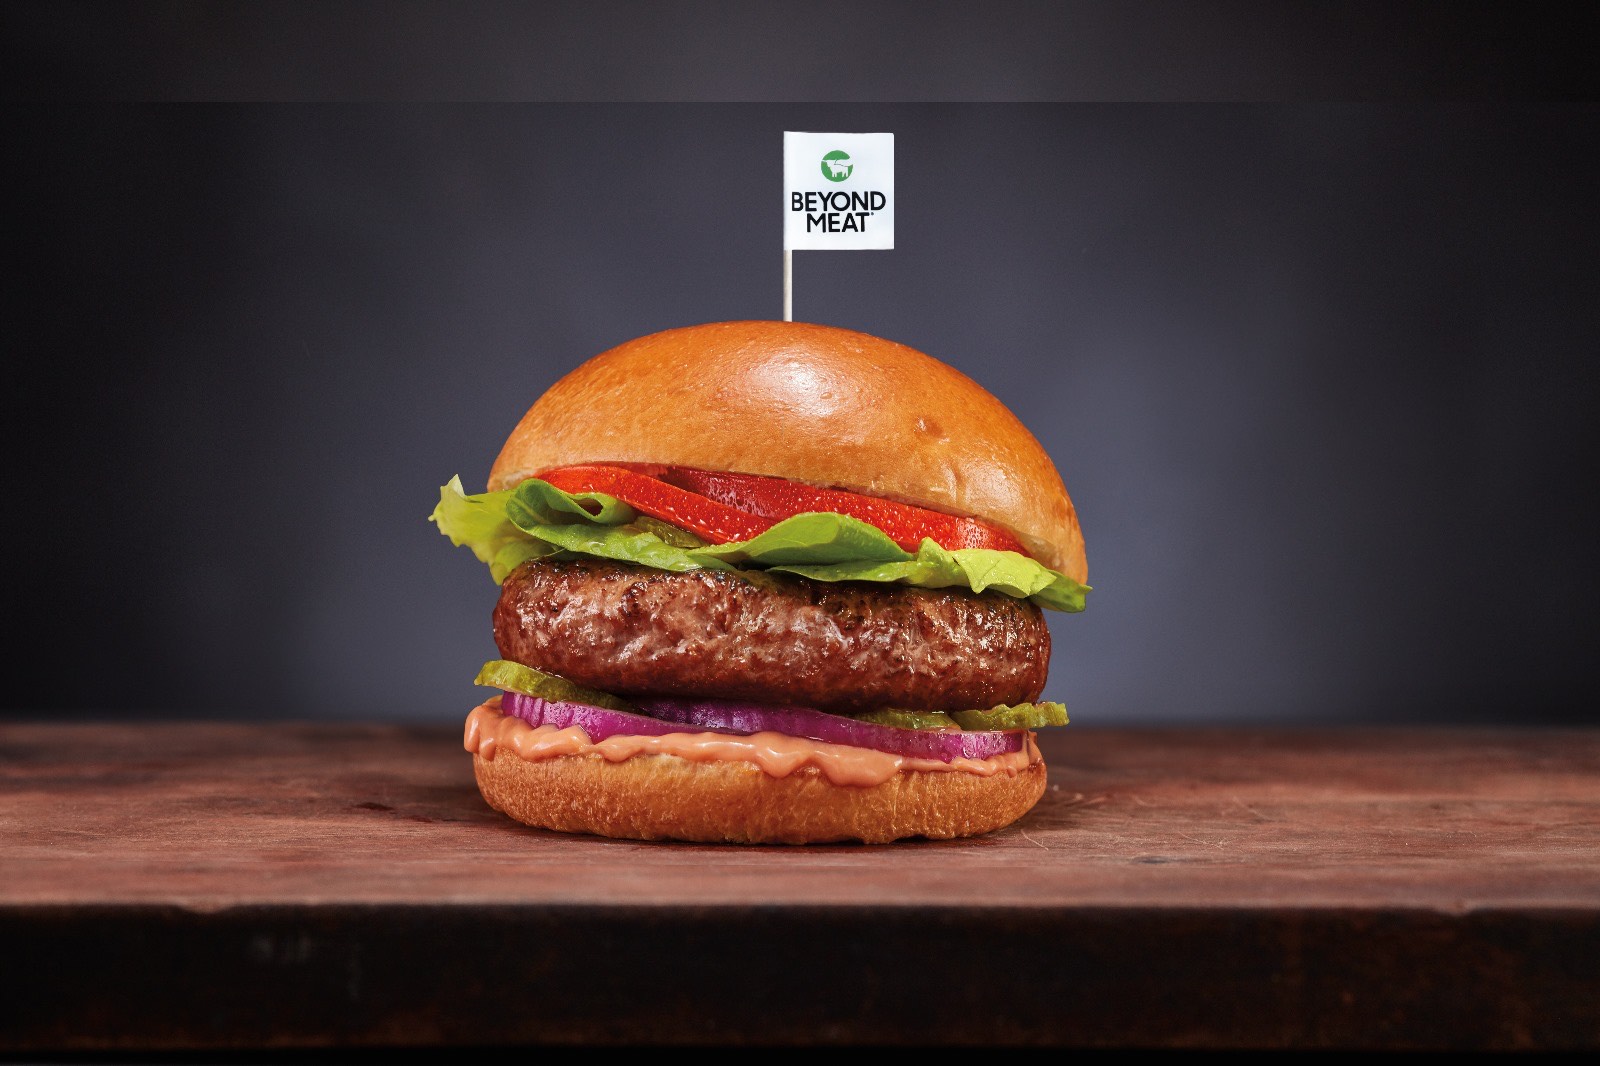 Free Beyond Burger Jalapeño to be given away at St Annes Square (20 ...